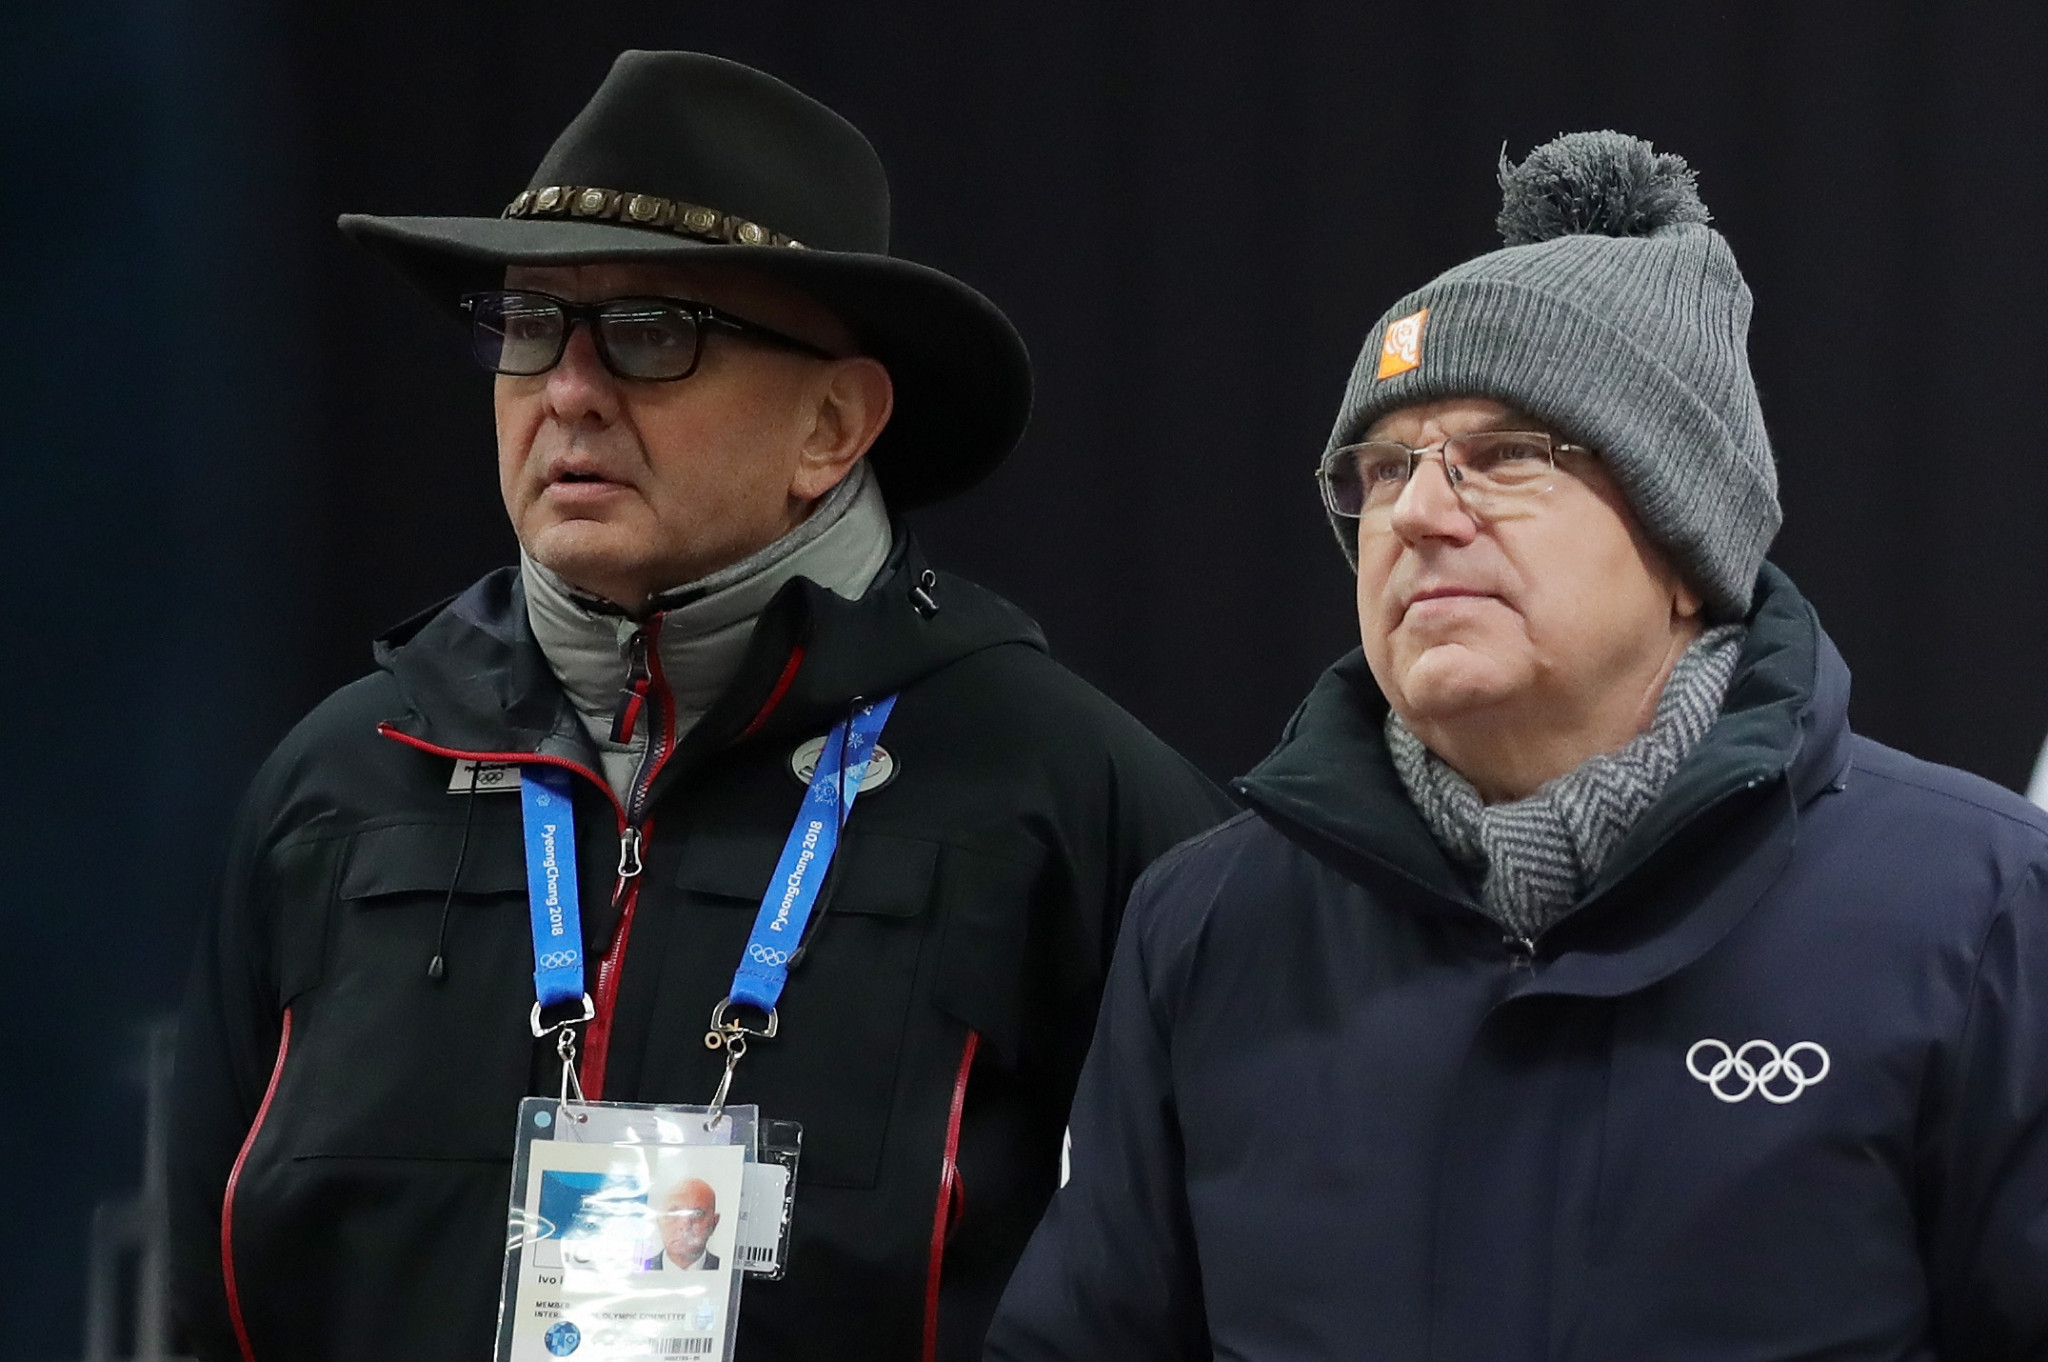 IBSF President Ivo Ferriani, left, alongside IOC counterpart Thomas Bach, will chair the two-day meeting of the IBSF Executive Committee at the Hilton Airport Hotel in Munich as he bids for re-election ©Getty Images